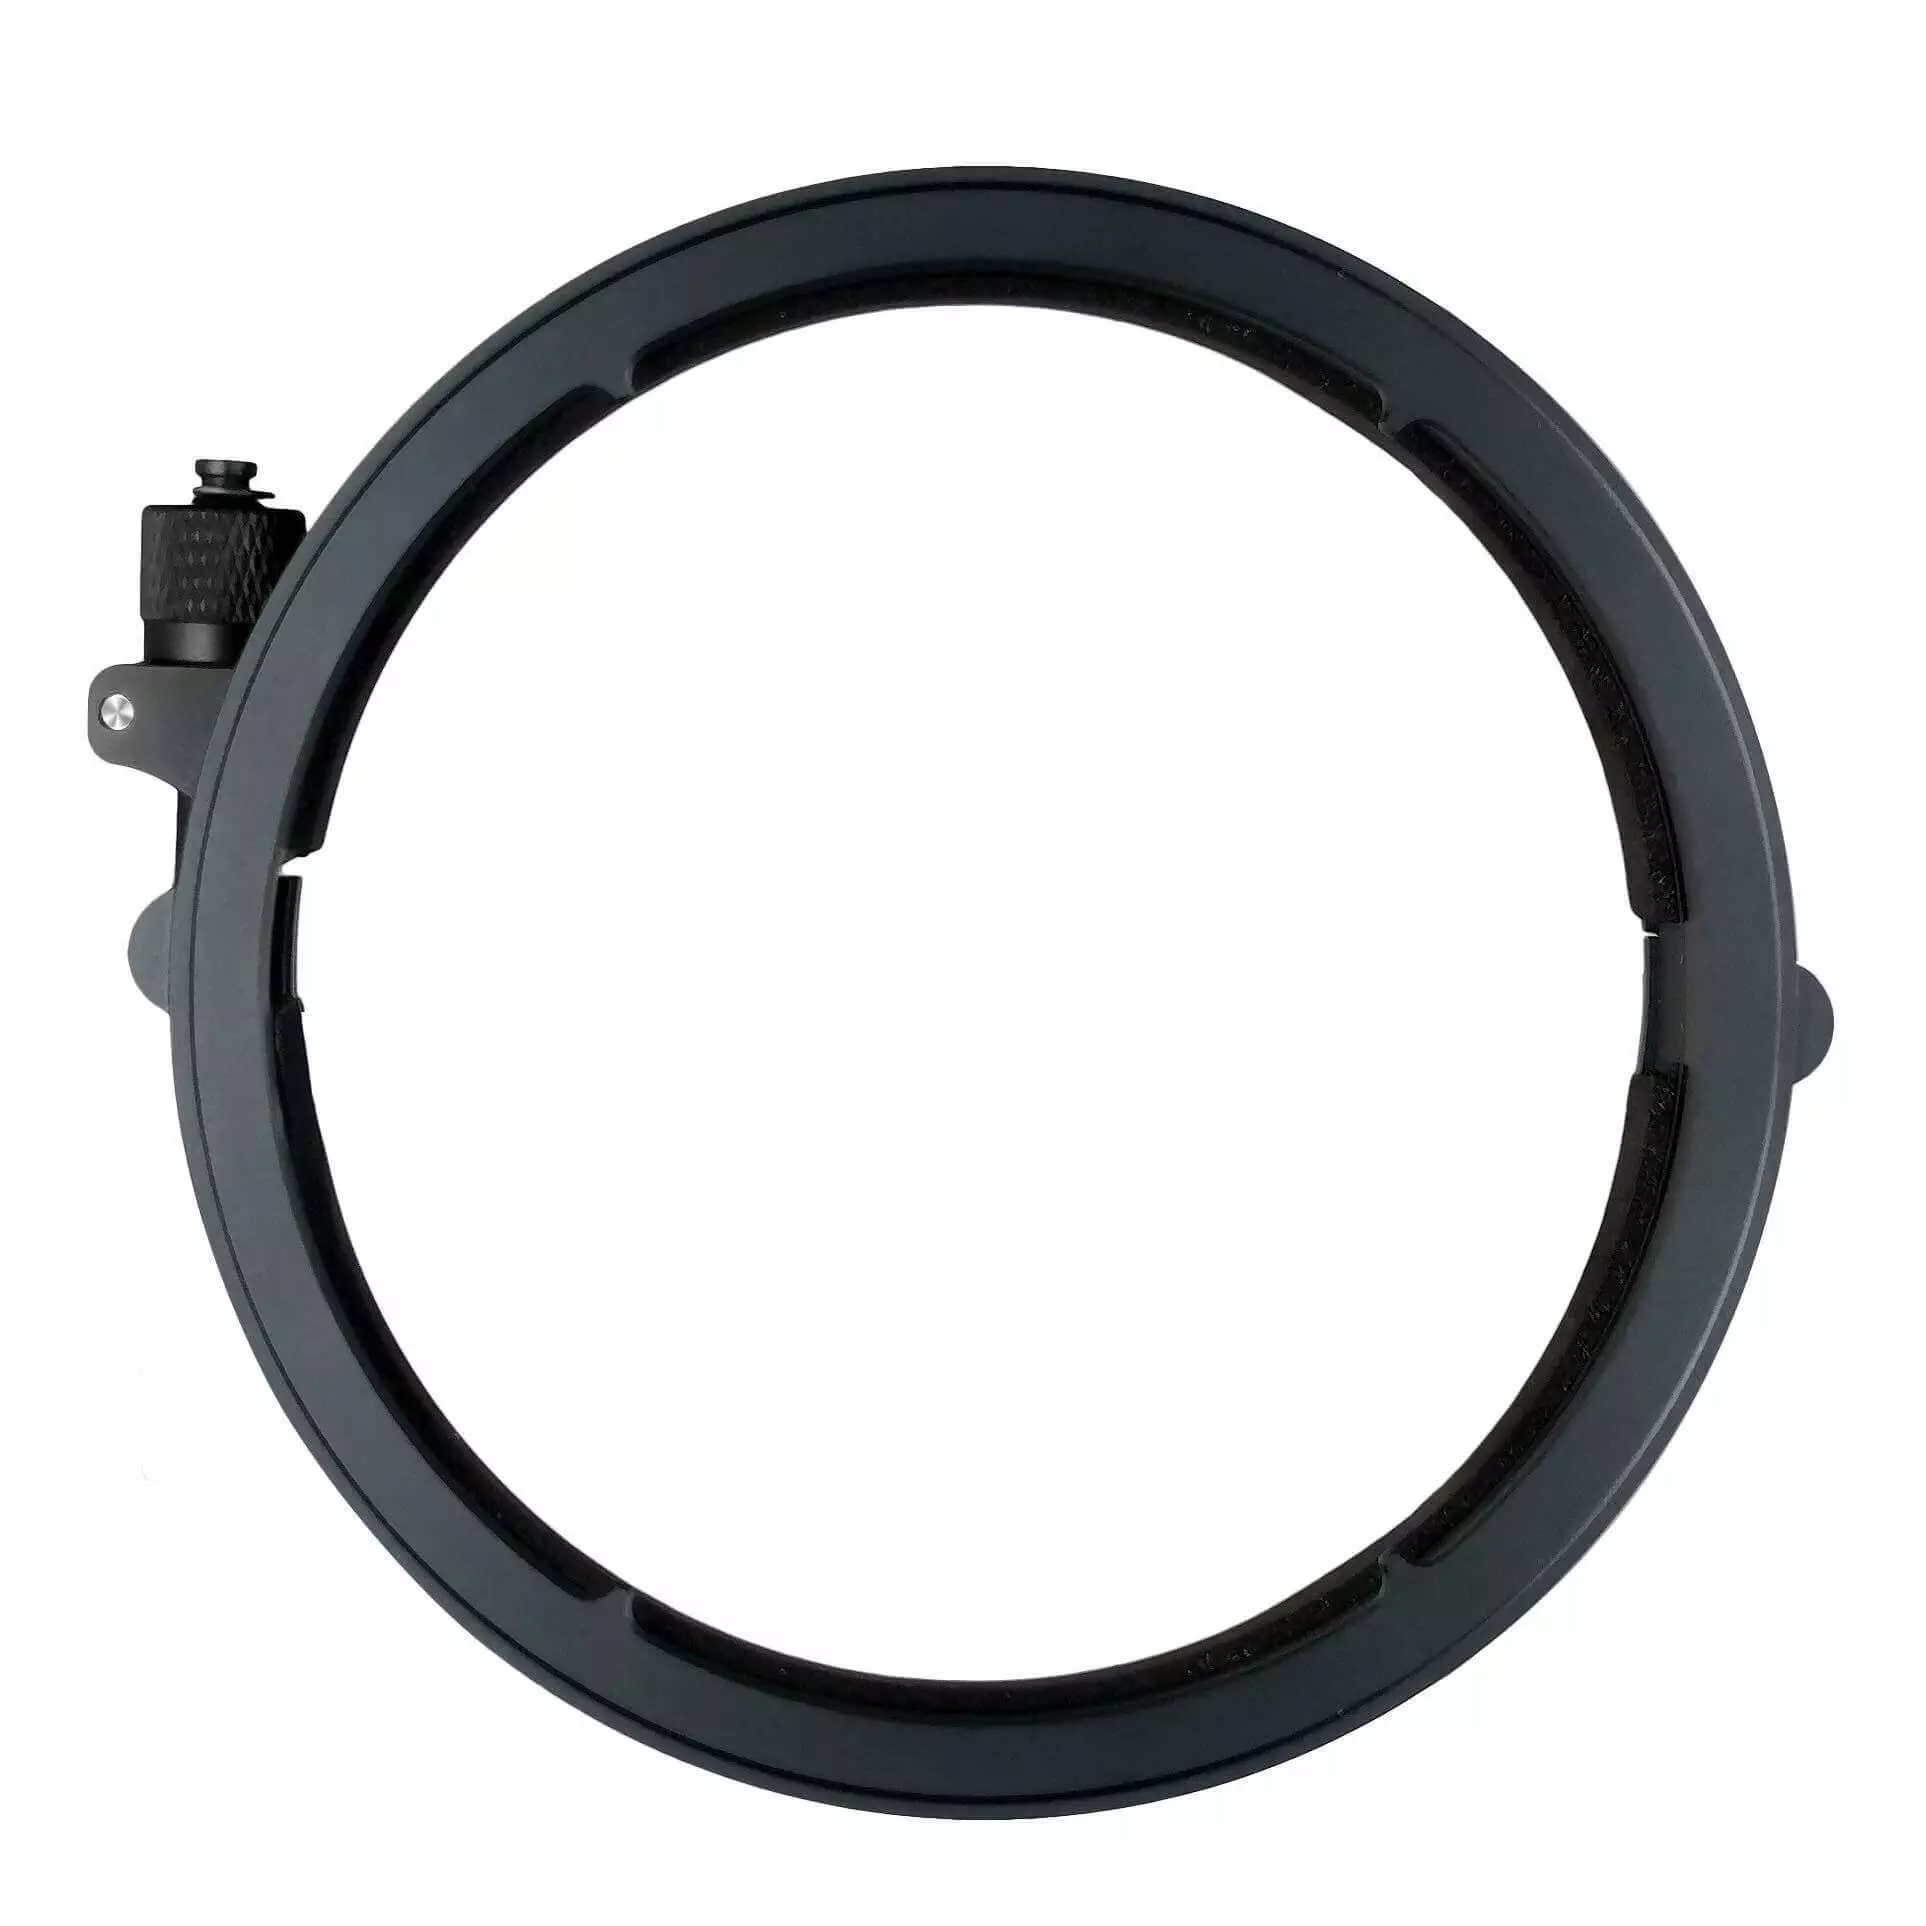 H&Y Adapter Ring for Sony FE 14mm F1.8